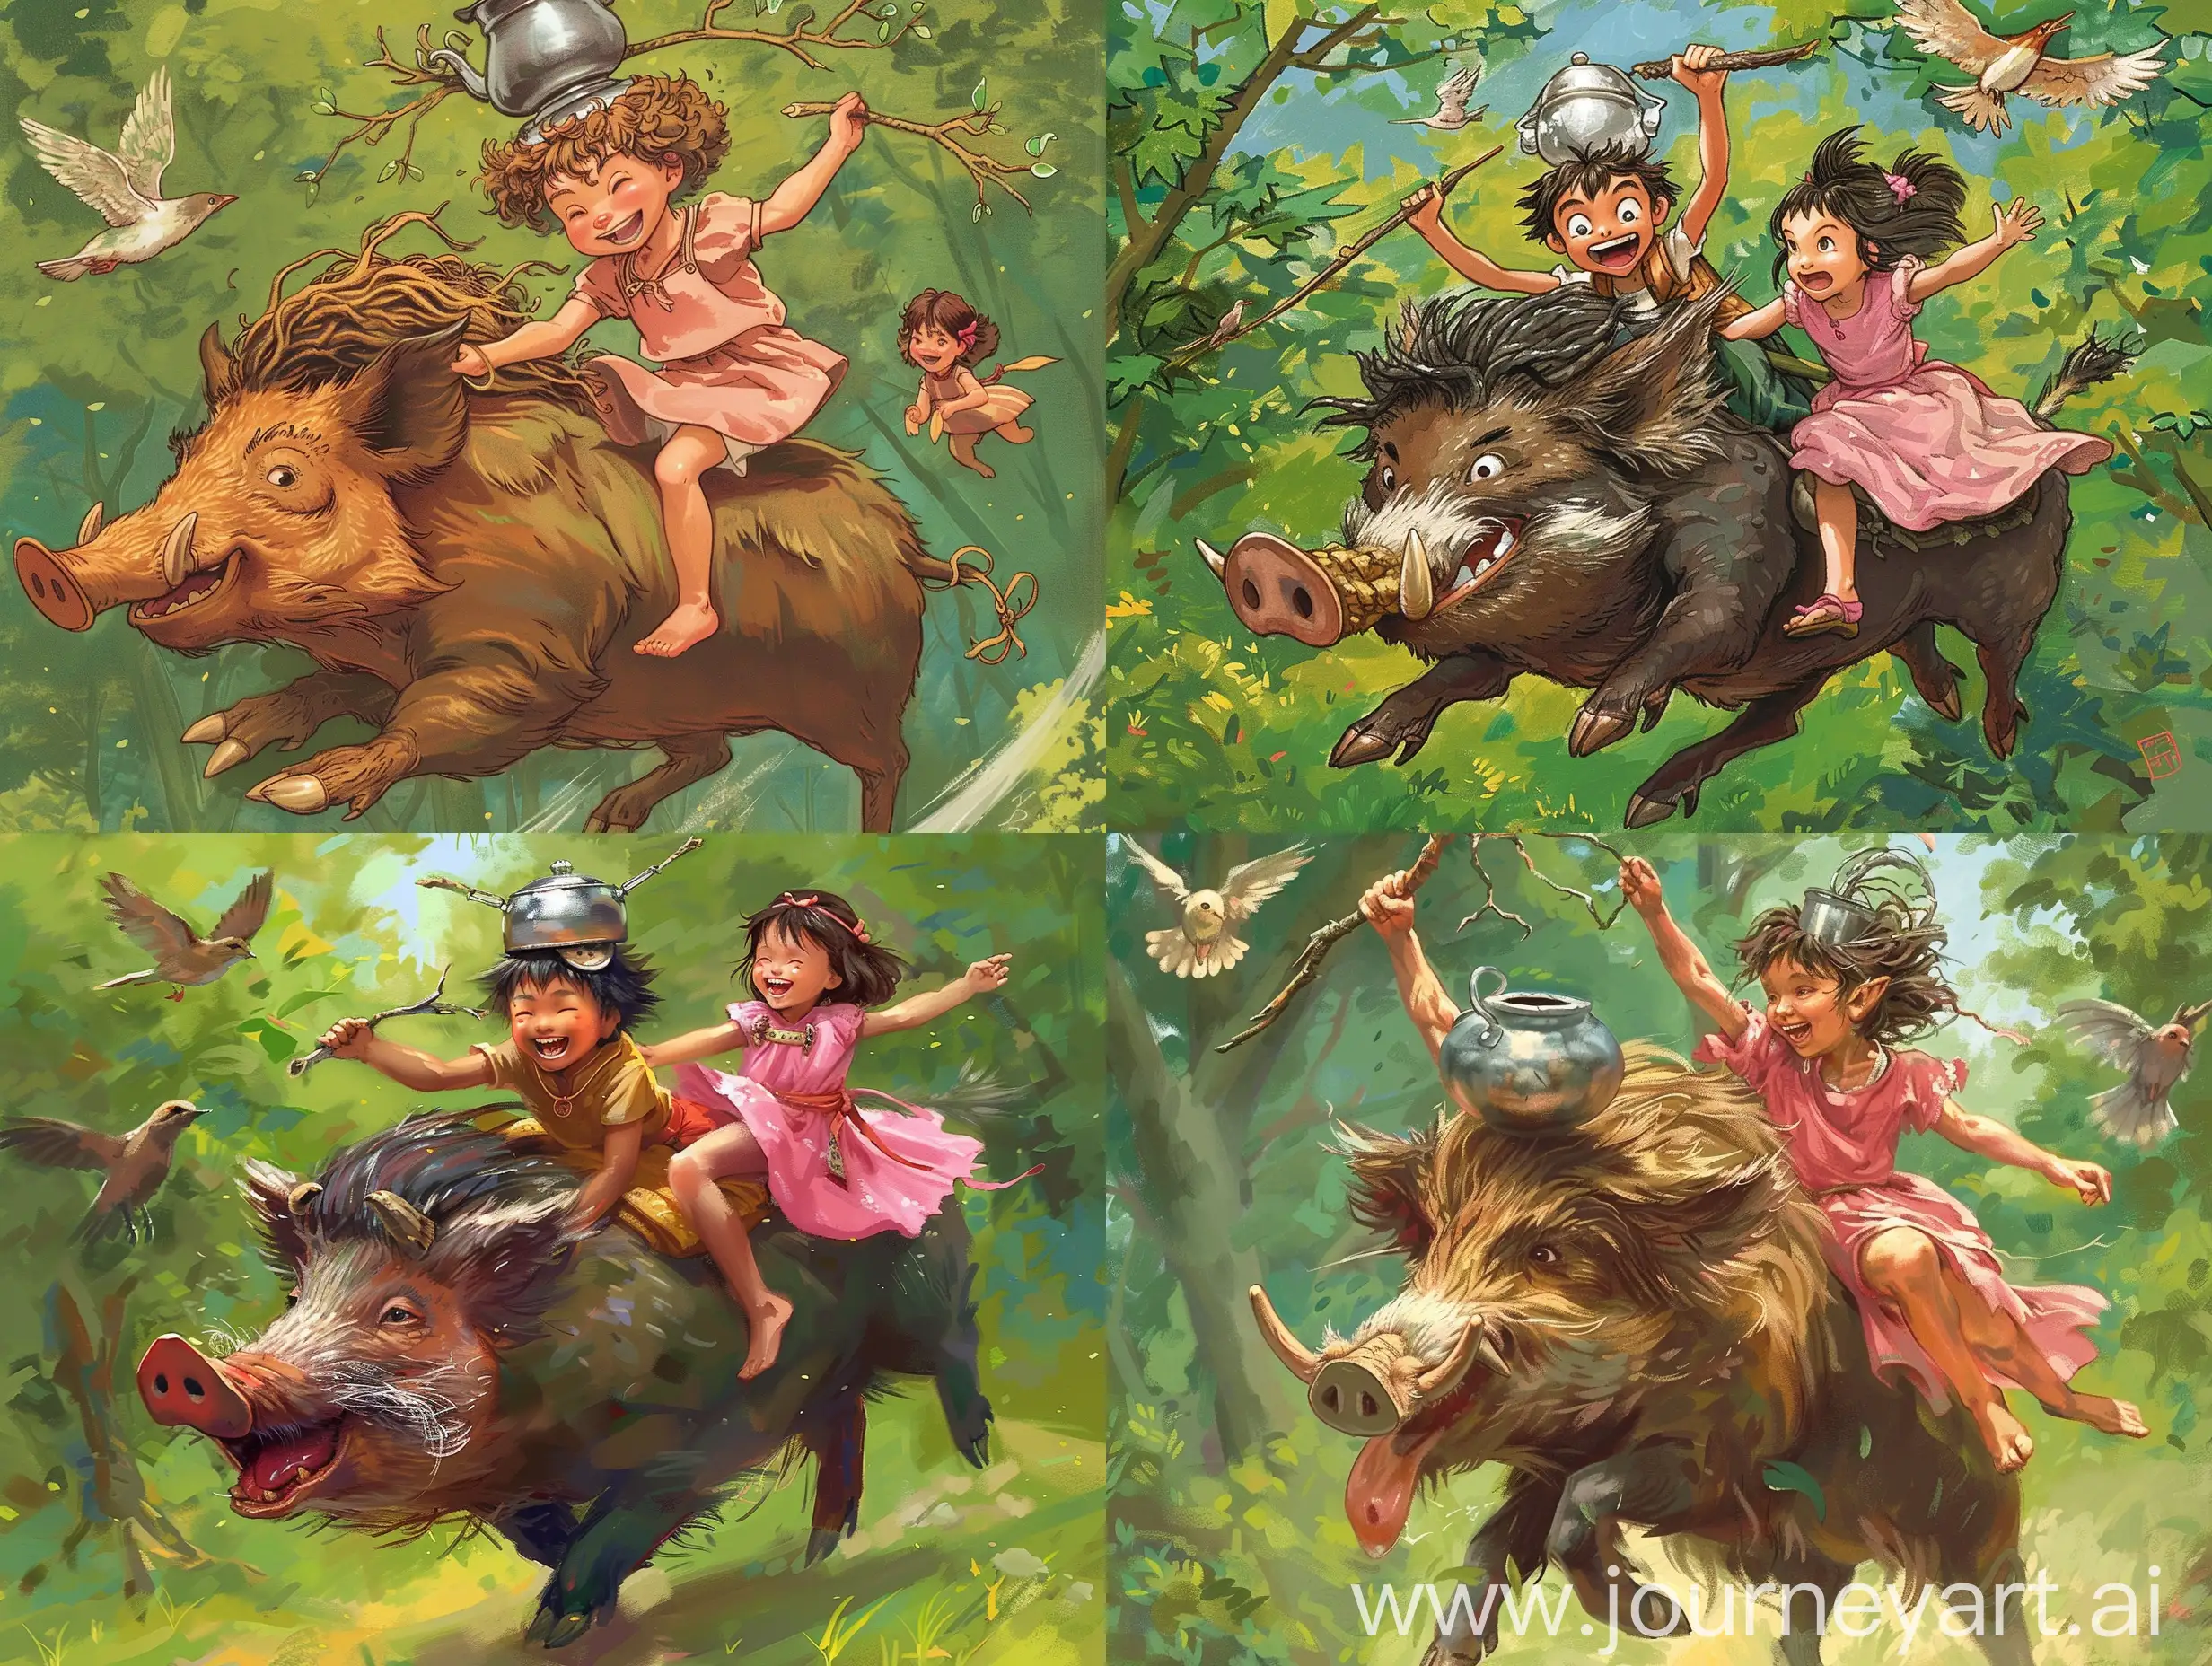 A ten-year-old wild boy and a little girl of four are riding on a running wild boar. The boy is wearing a silver pot on his head and holding a branch with a happy expression. The girl is wearing a pink dress and has tense hands. Catching the hair of the wild boar, smiling from ear to ear, the background is a green forest, two birds are flying with them, Studio Ghibli Film by Hayao Miyazaki, Highly detailed illustration